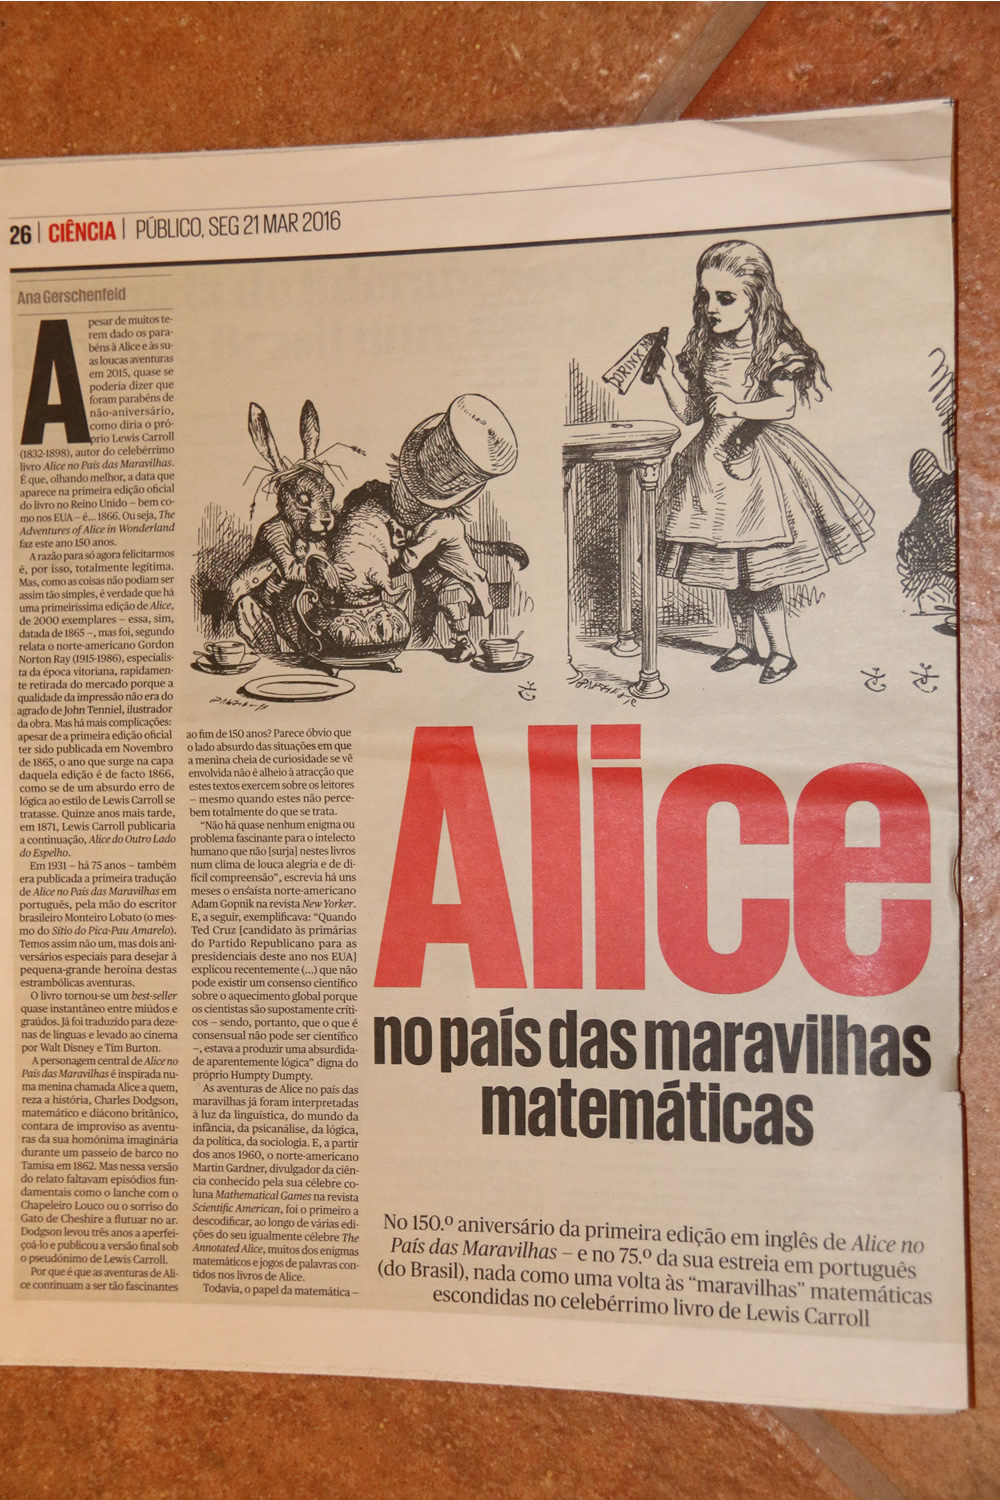 Portuguese coverage of the celebrations of 150 years of Alice in Wonderland